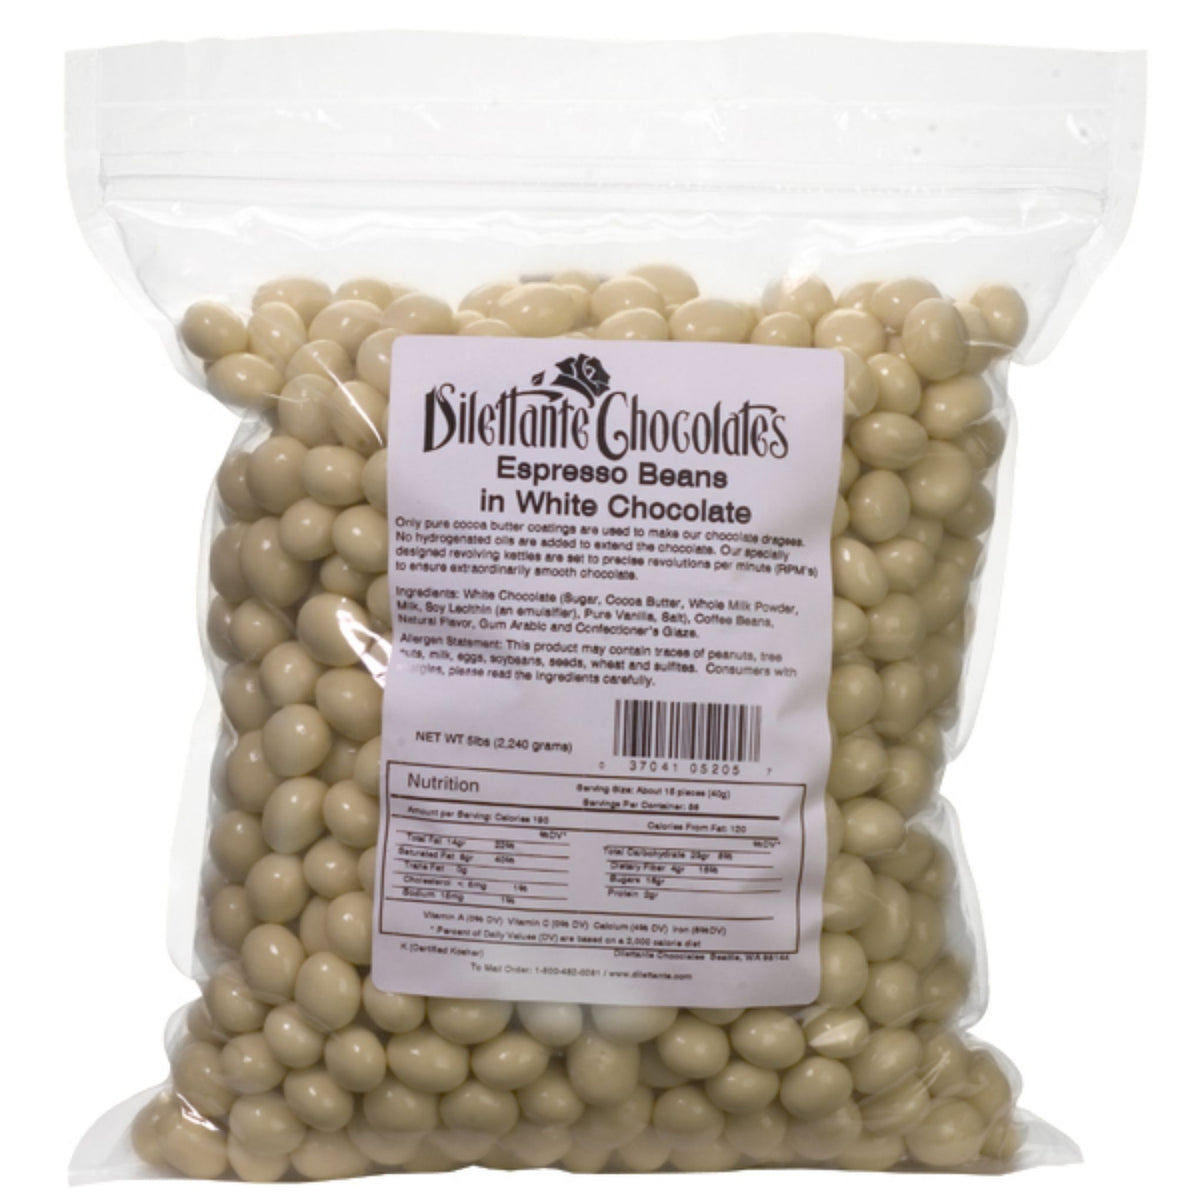 Dilettante Chocolates Espresso Beans in White Chocolate 5-Pound Bulk Bag for Sharing